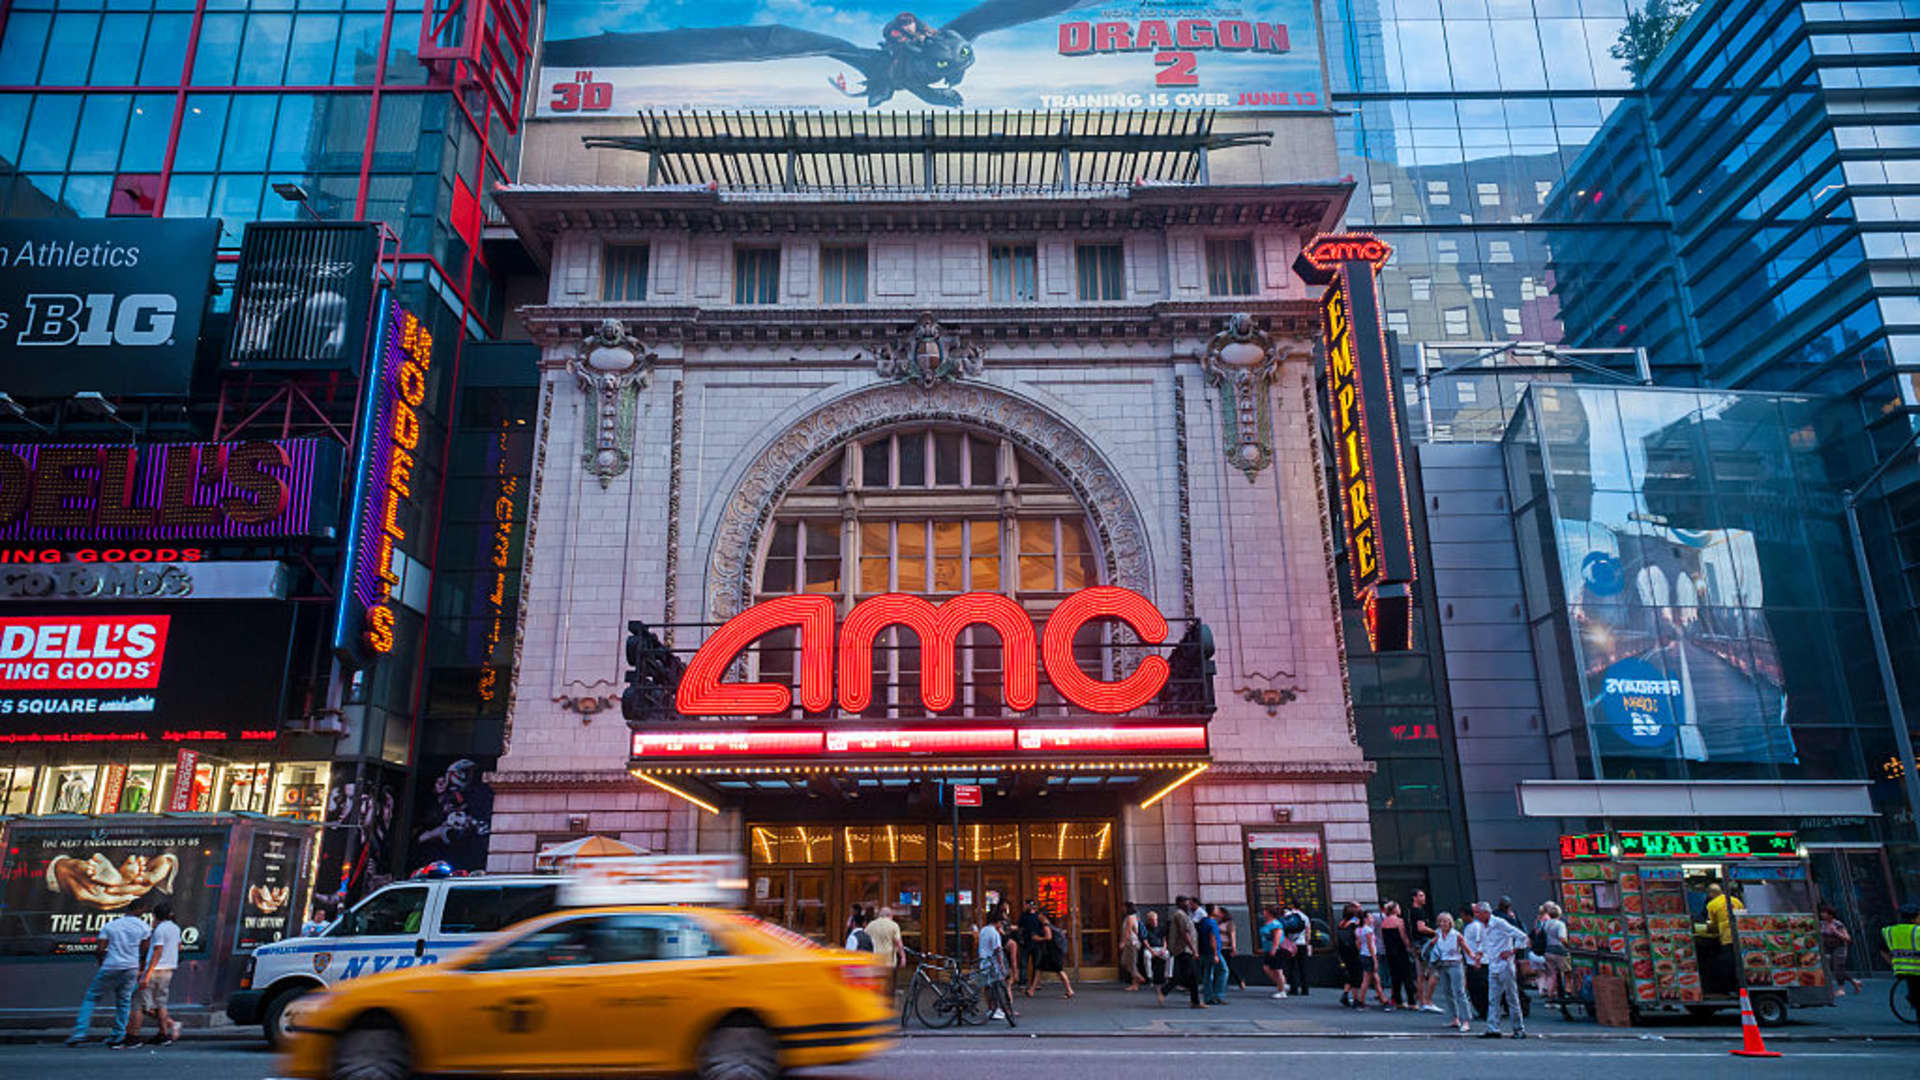 AMC plans to issue 517 million shares of preferred stock, under the ticker symbol 'APE'